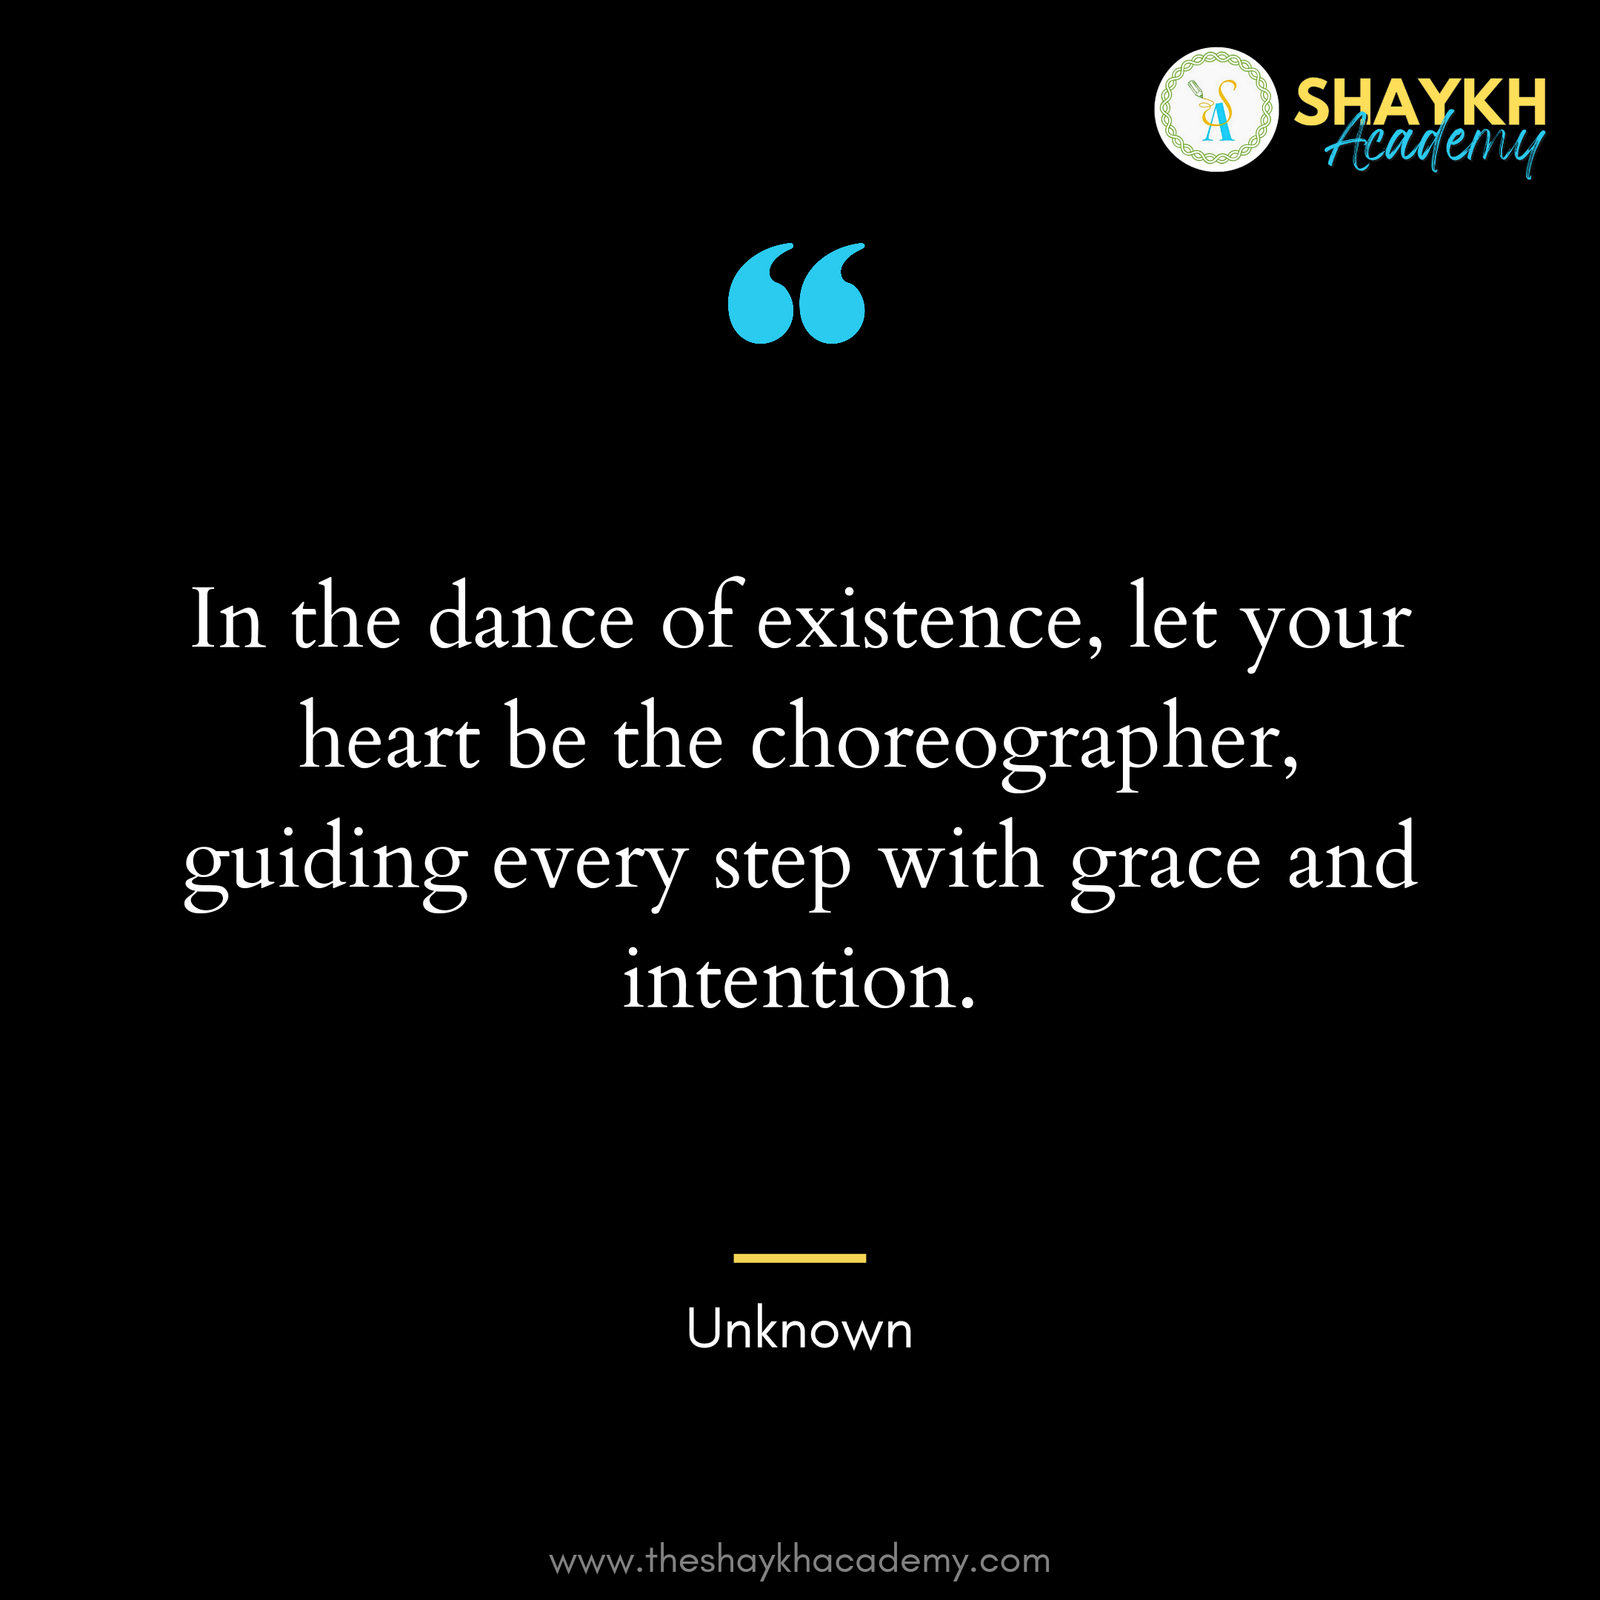 In the dance of existence, let your heart be the choreographer, guiding every step with grace and intention.